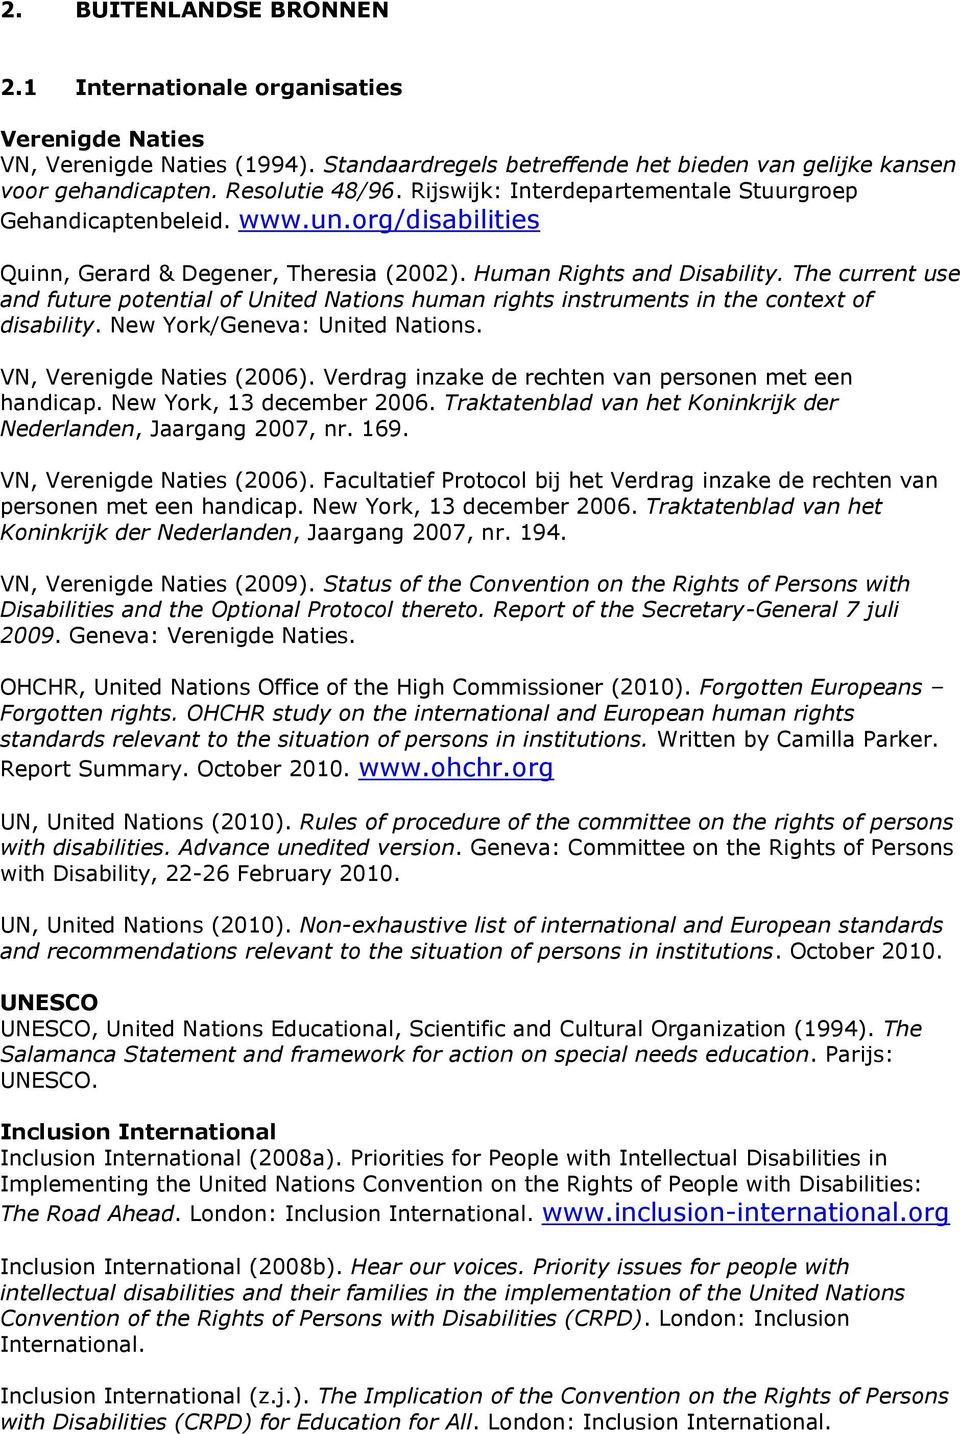 The current use and future potential of United Nations human rights instruments in the context of disability. New York/Geneva: United Nations. VN, Verenigde Naties (2006).